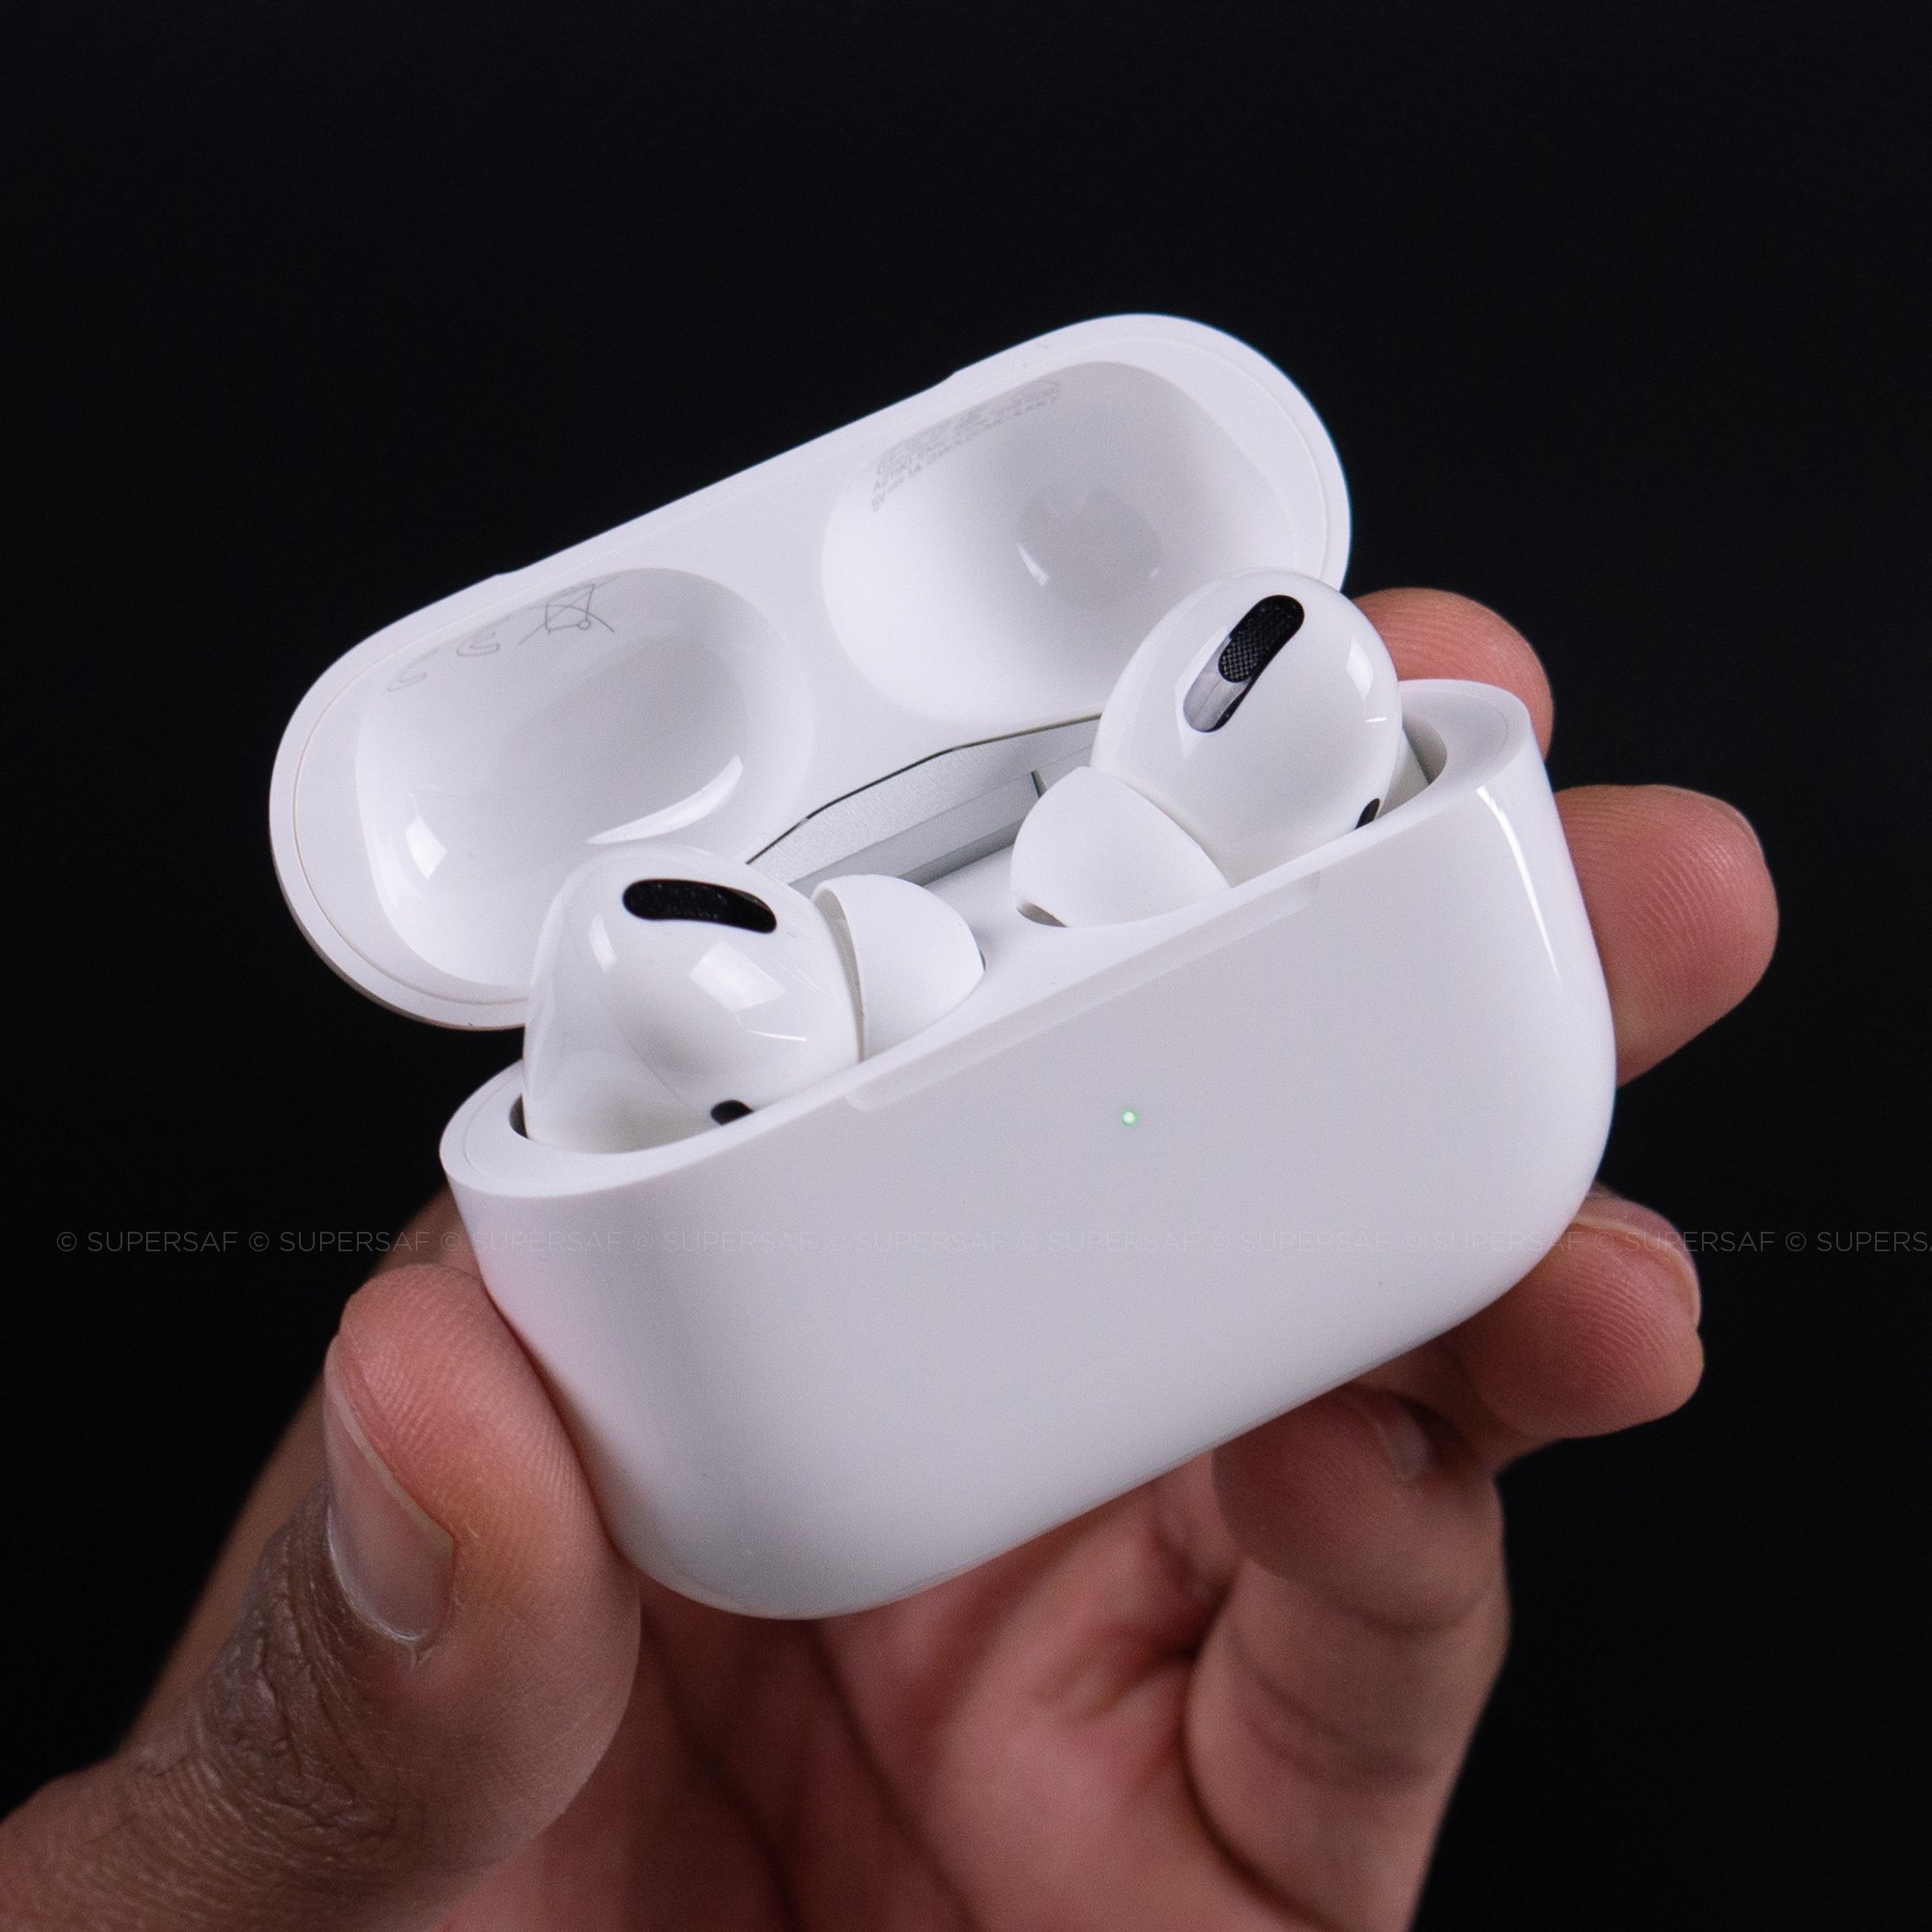 AhmedMia en Twitter: "NEW VIDEO: AirPods Pro Unboxing, and Comparison with AirPods 2 😎 ▻▻▻ https://t.co/XPtstdj4bx RT! https://t.co/kGZelZsh59" / Twitter